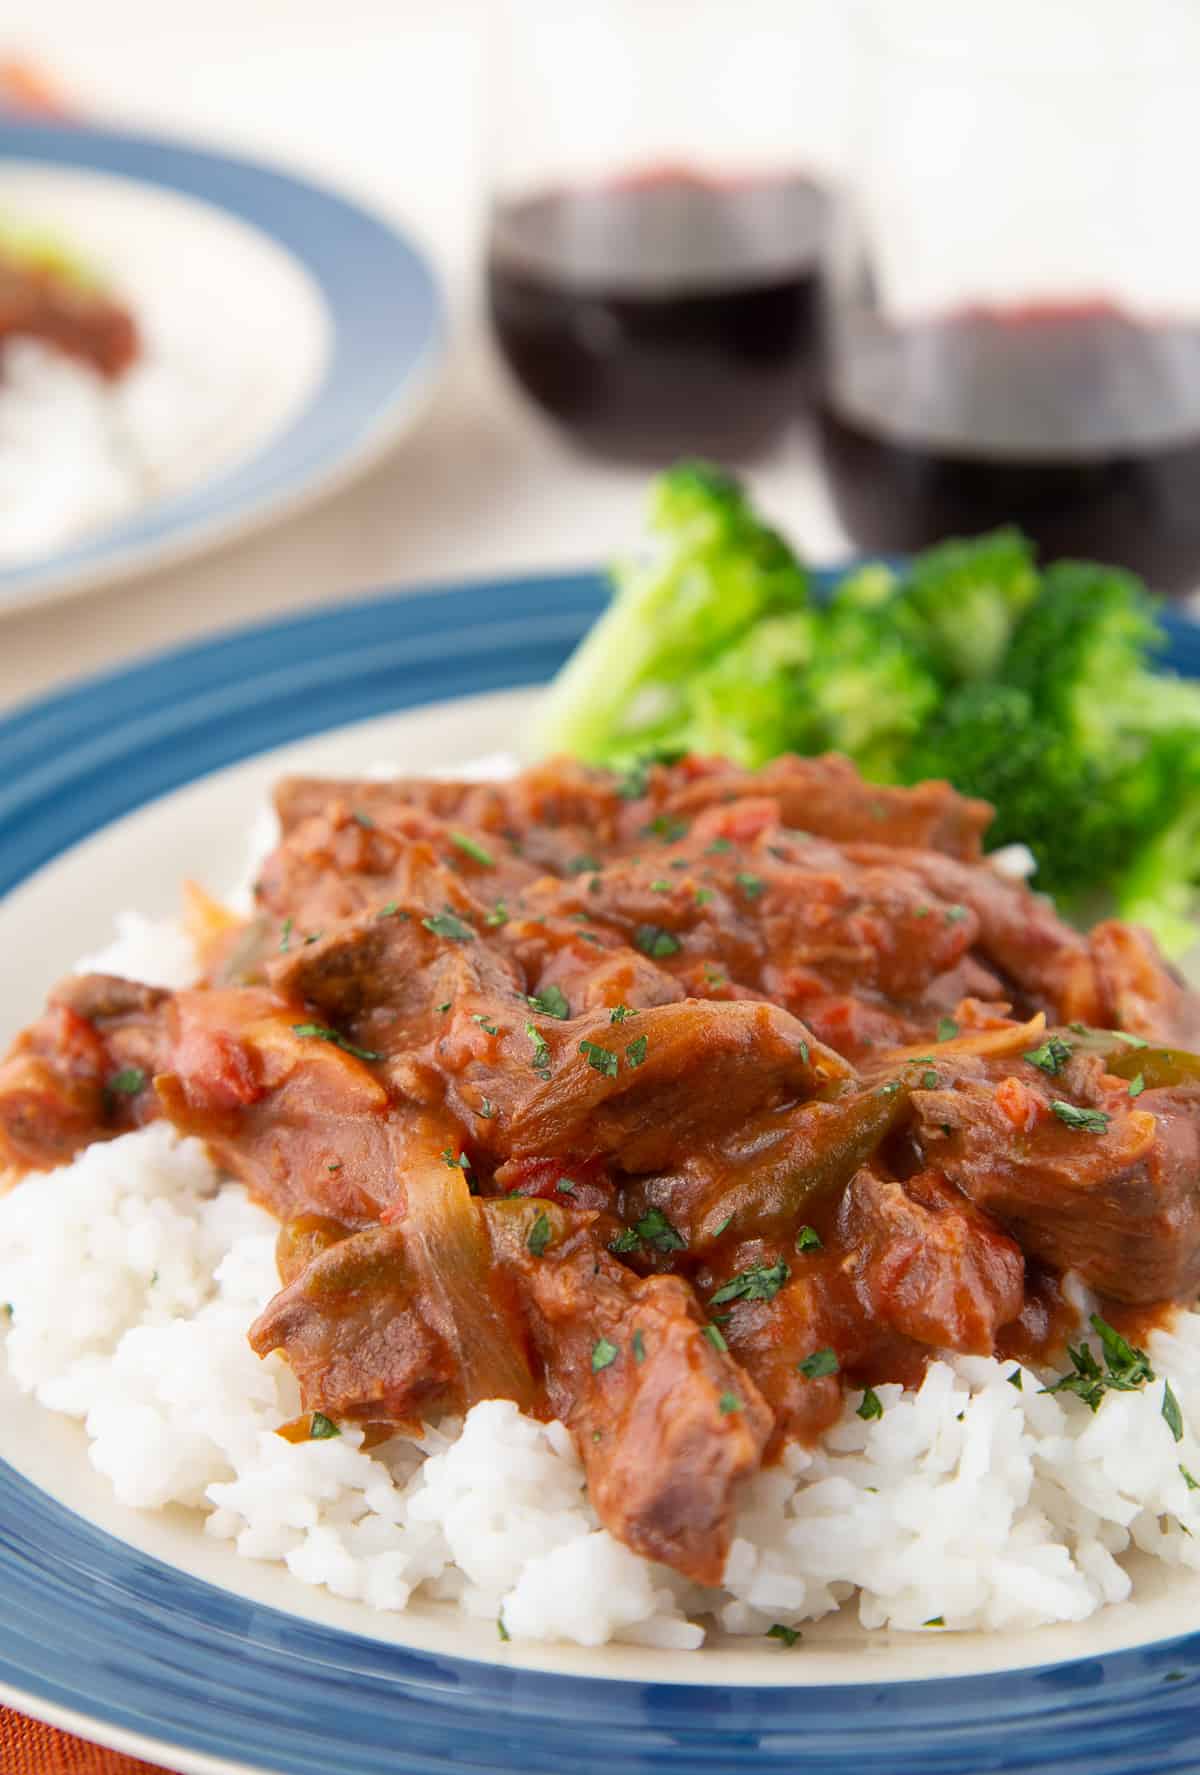 close-up of smothered steak on top of rice on a blue rimmed plate, with broccoli and stemless red wine glasses in the background.